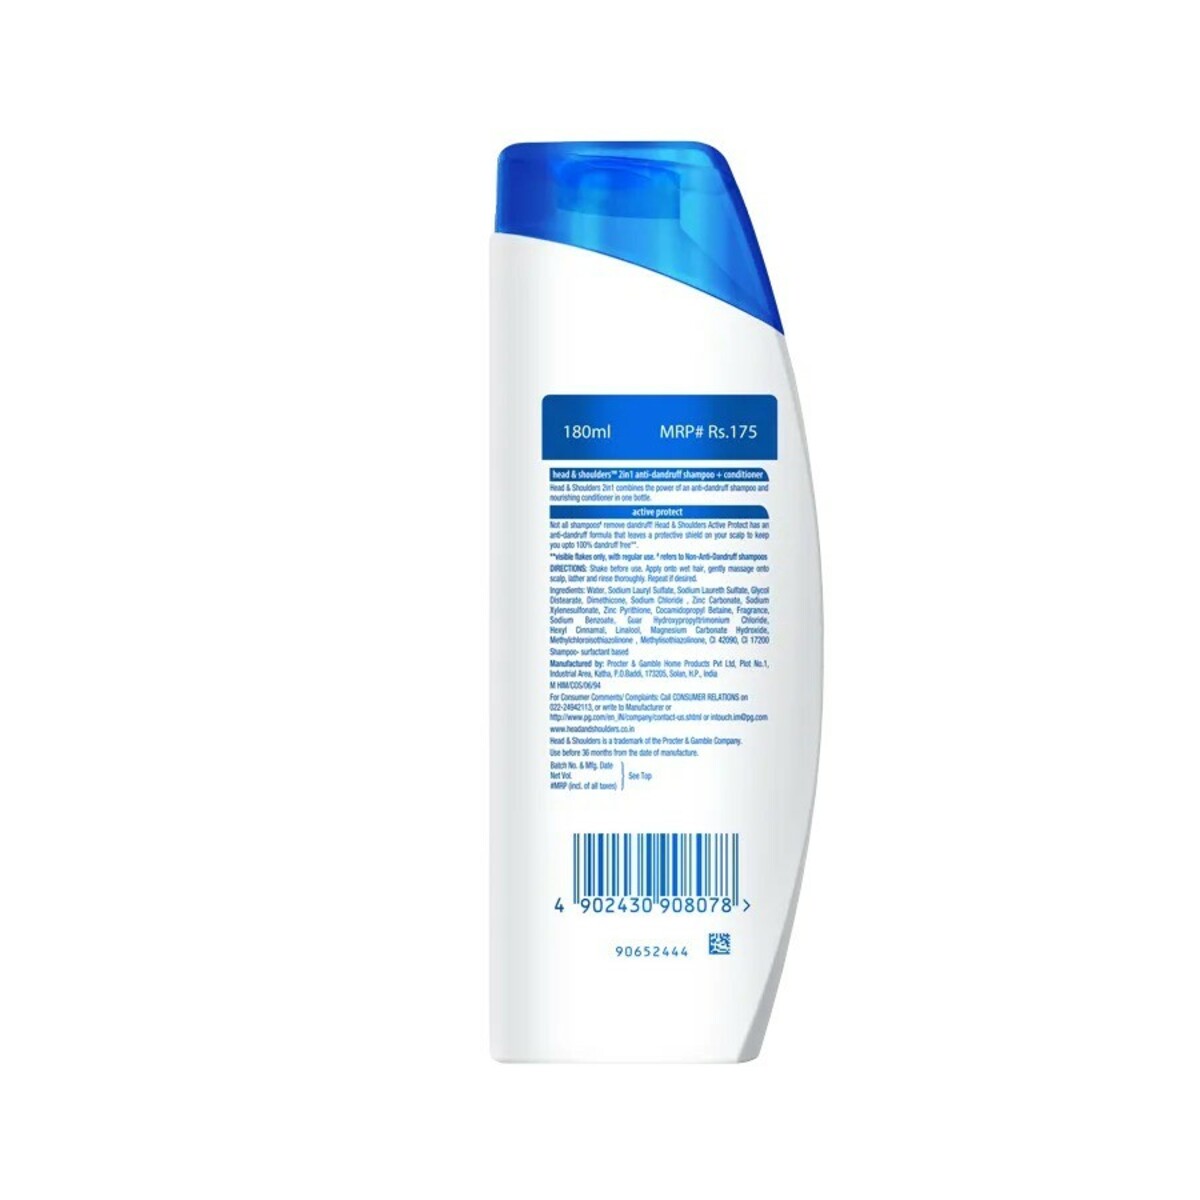 Head & shoulders Shampoo Active  Protect 2in1 180ml